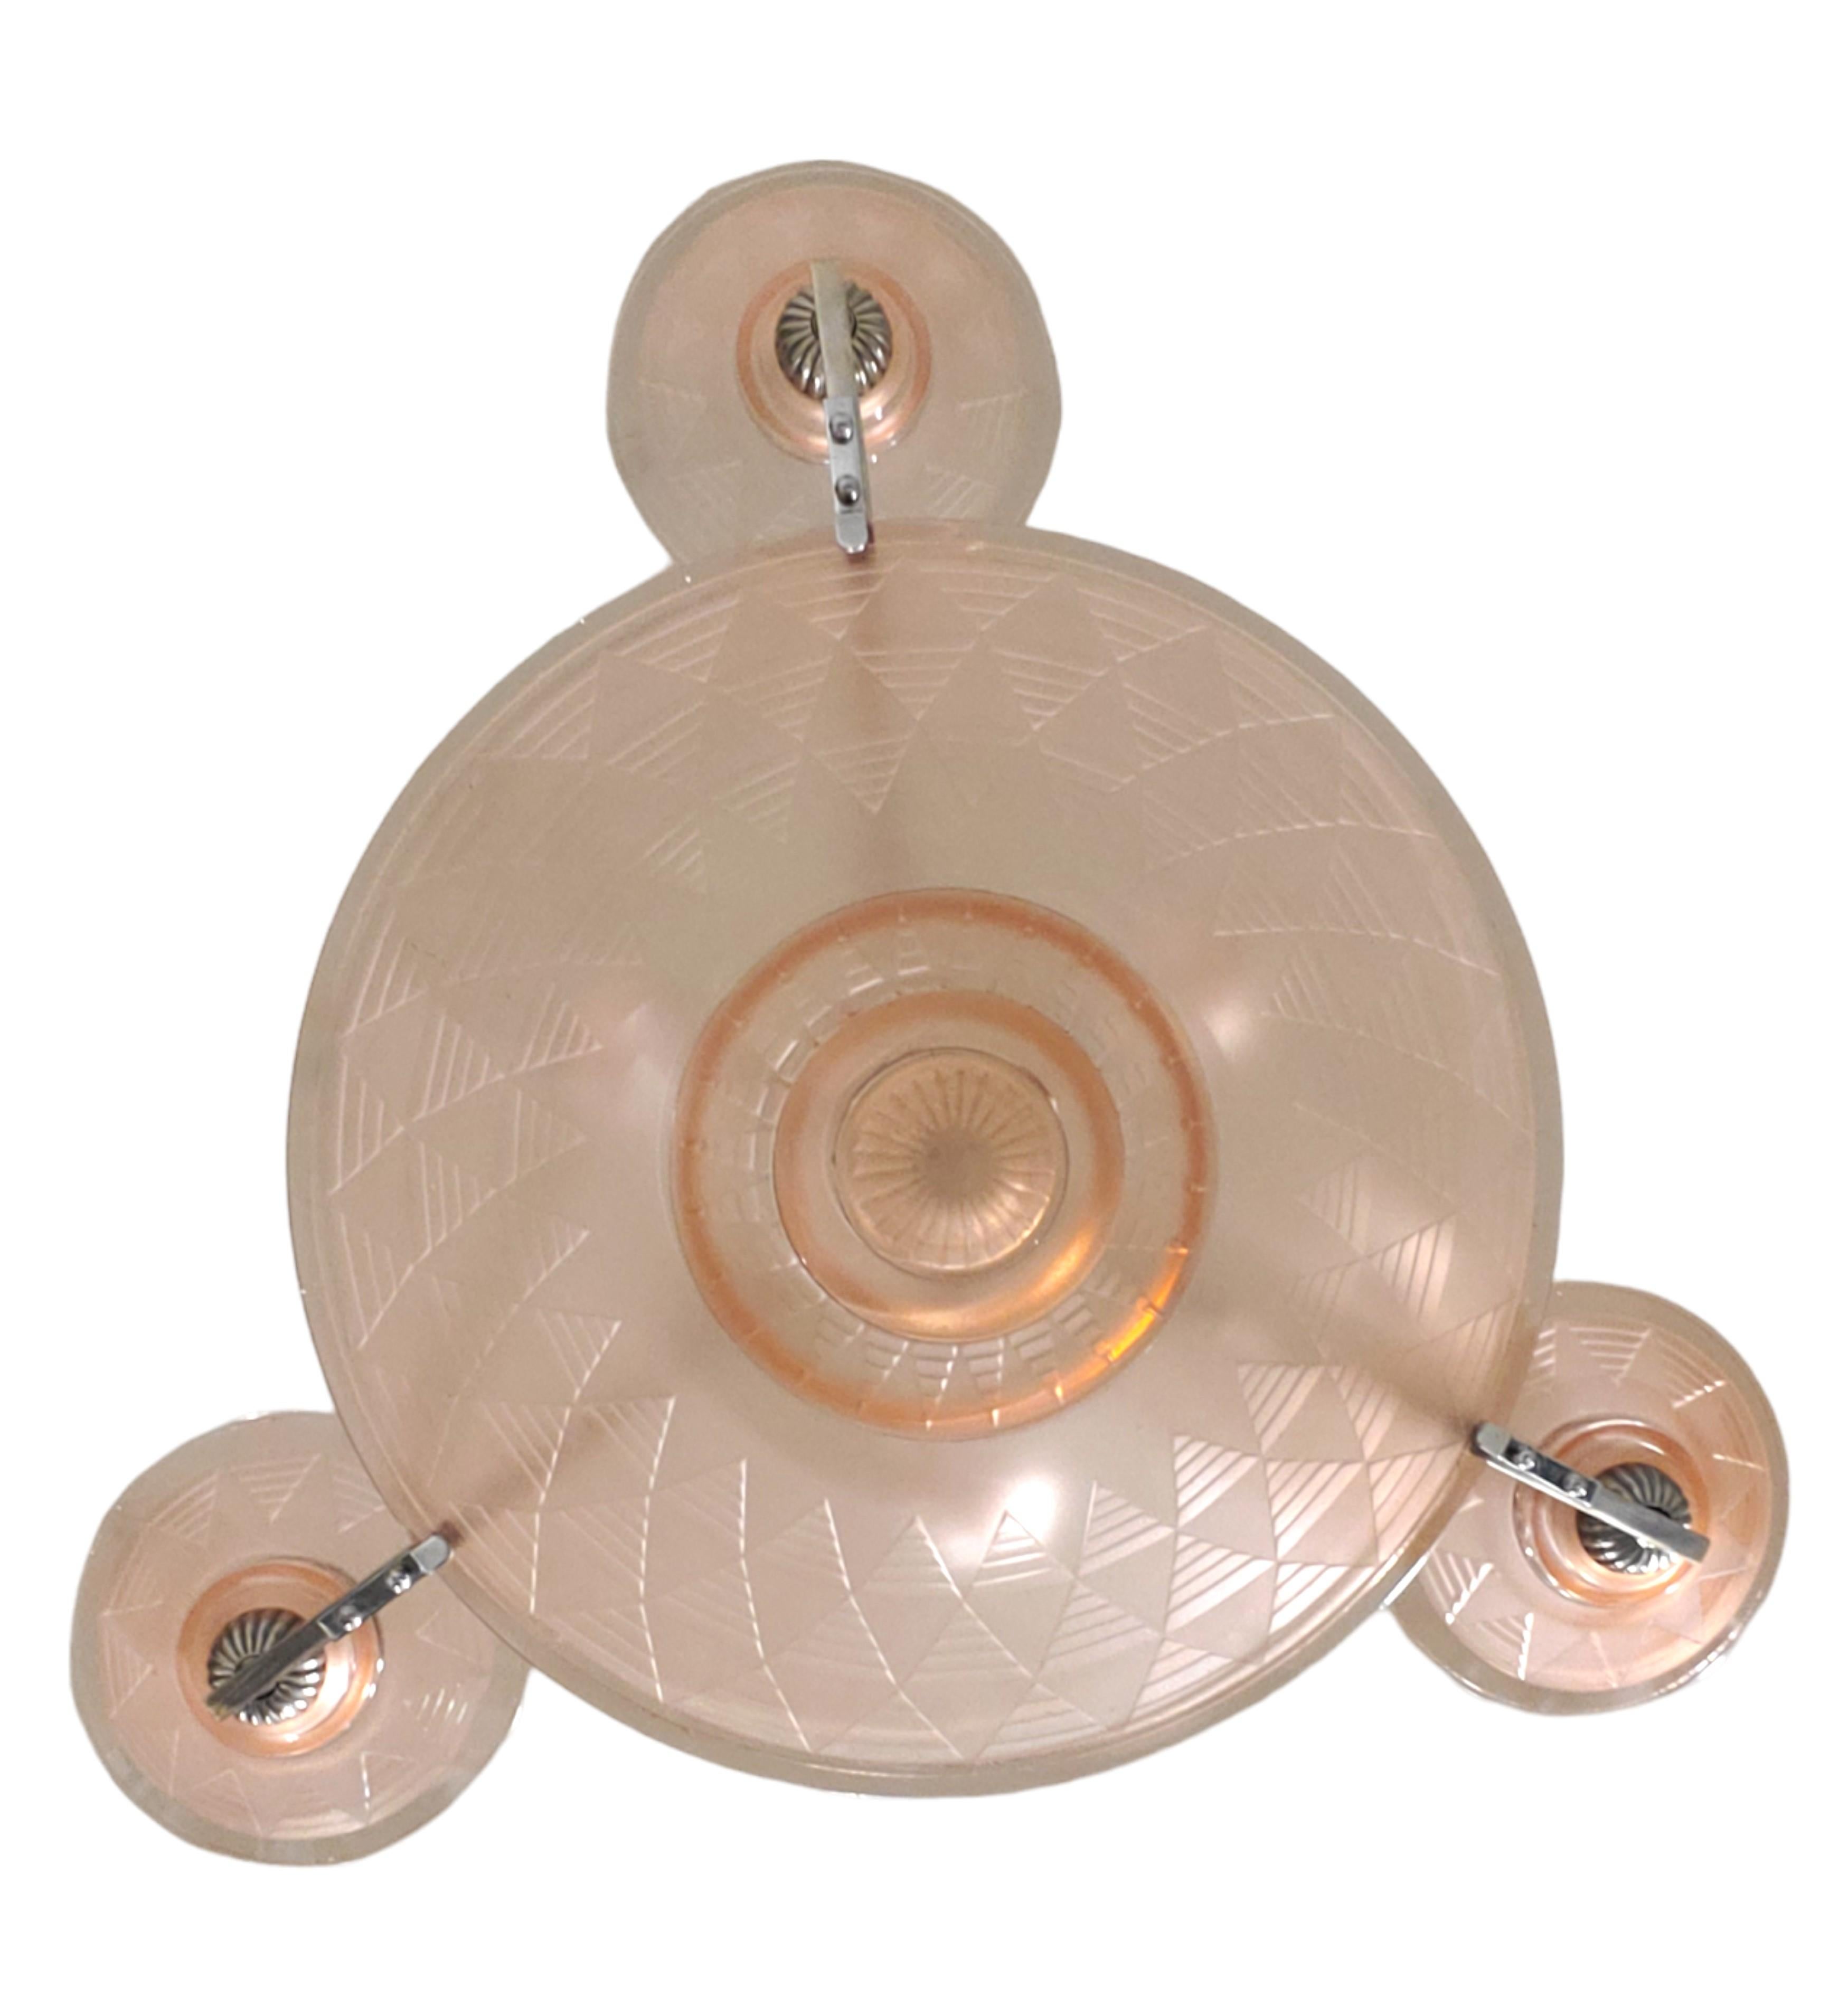 Petitot Art Deco peach /salmon /pink frosted glass + nickeled bronze chandelier In Good Condition For Sale In New York City, NY